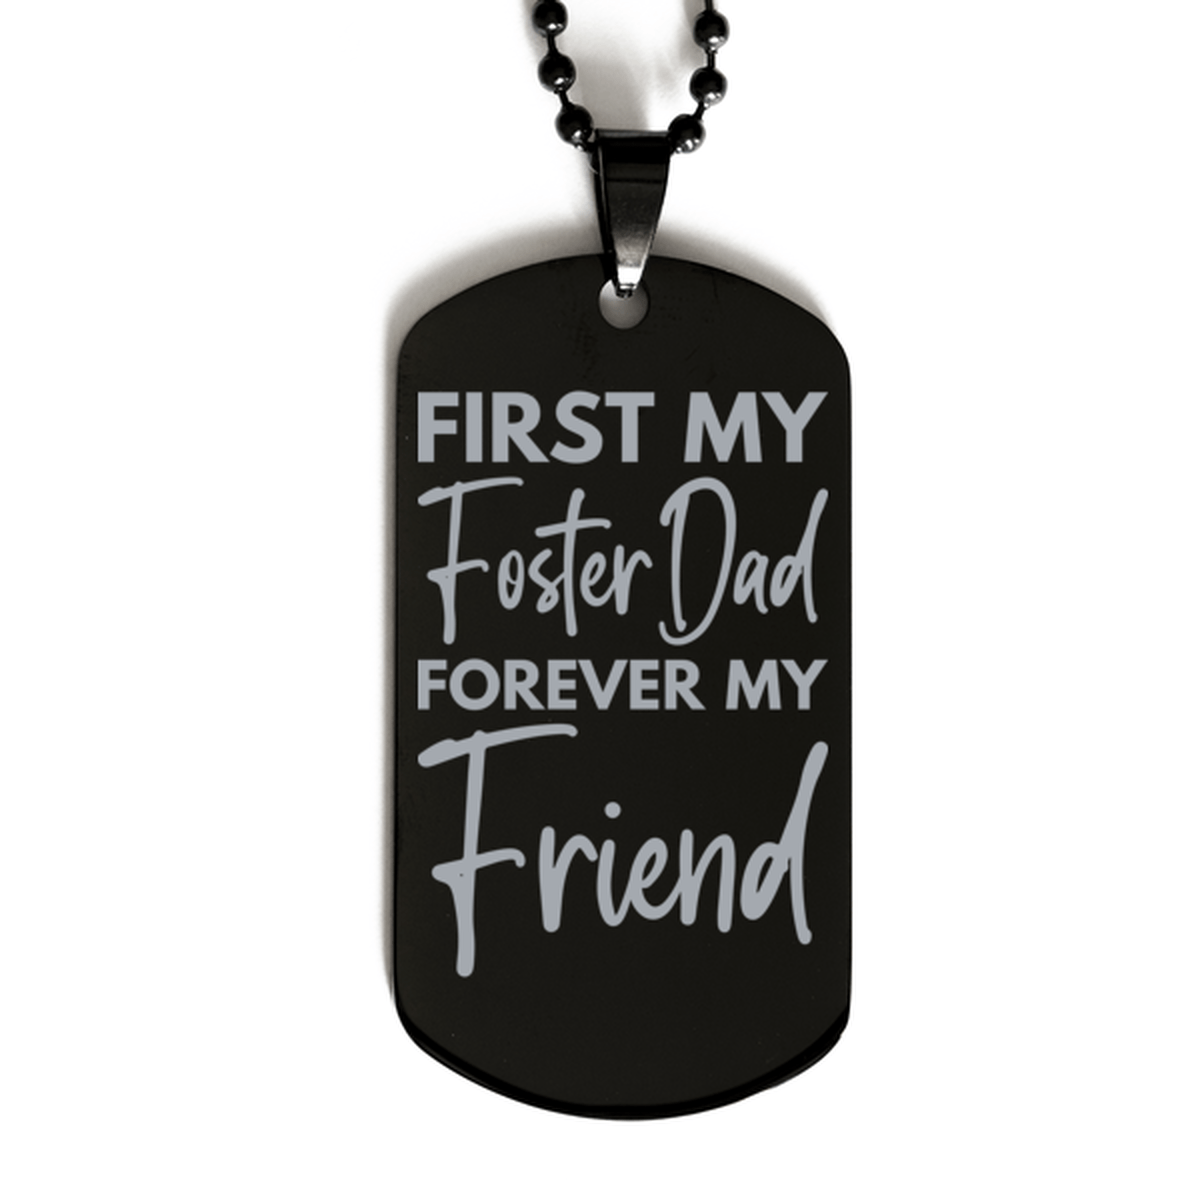 Inspirational Foster Dad Black Dog Tag Necklace, First My Foster Dad Forever My Friend, Best Birthday Gifts for Foster Dad